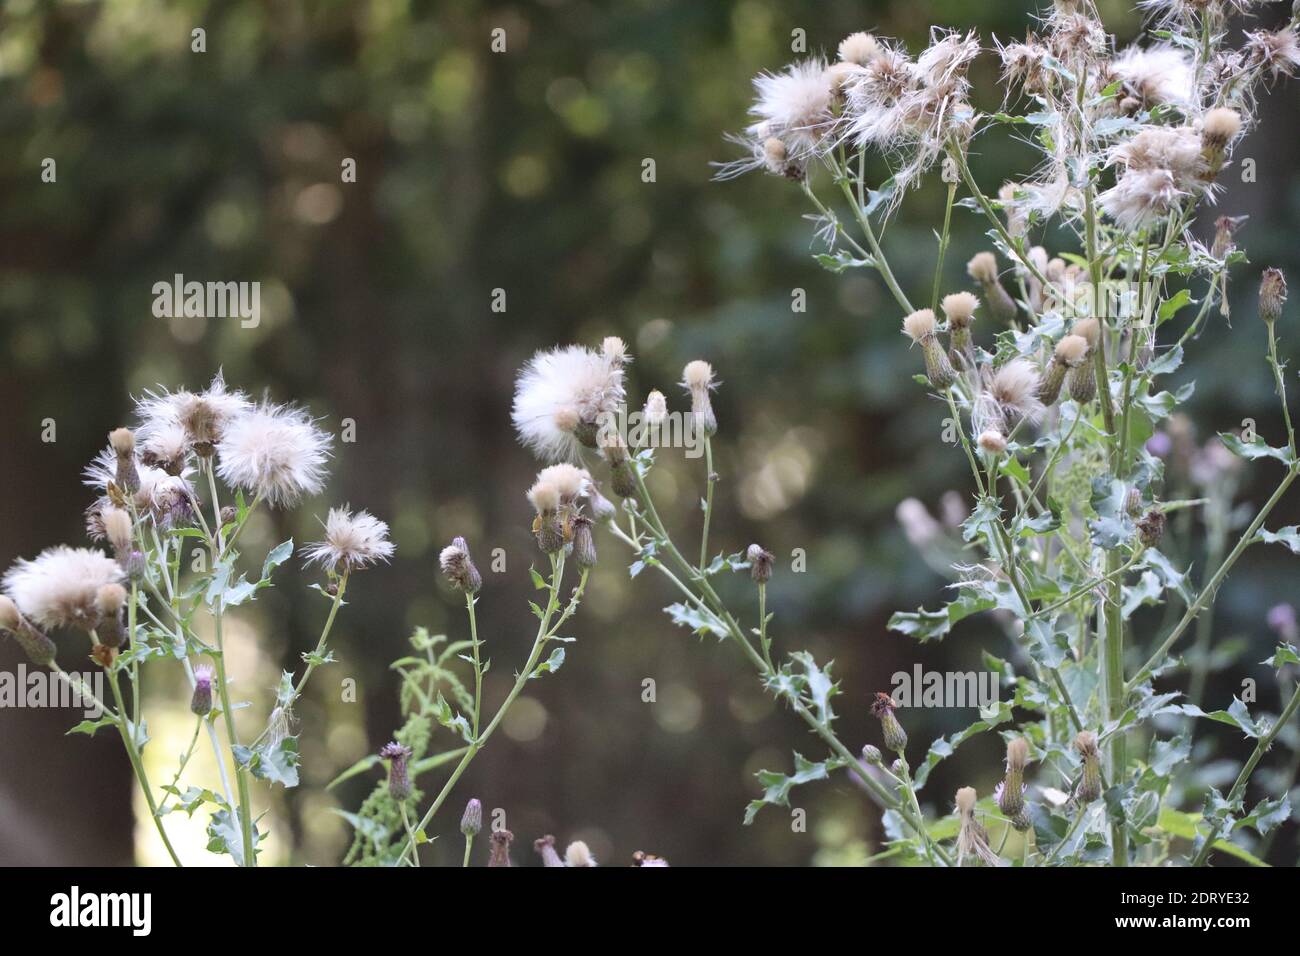 blooming thistles in front of a forest Stock Photo